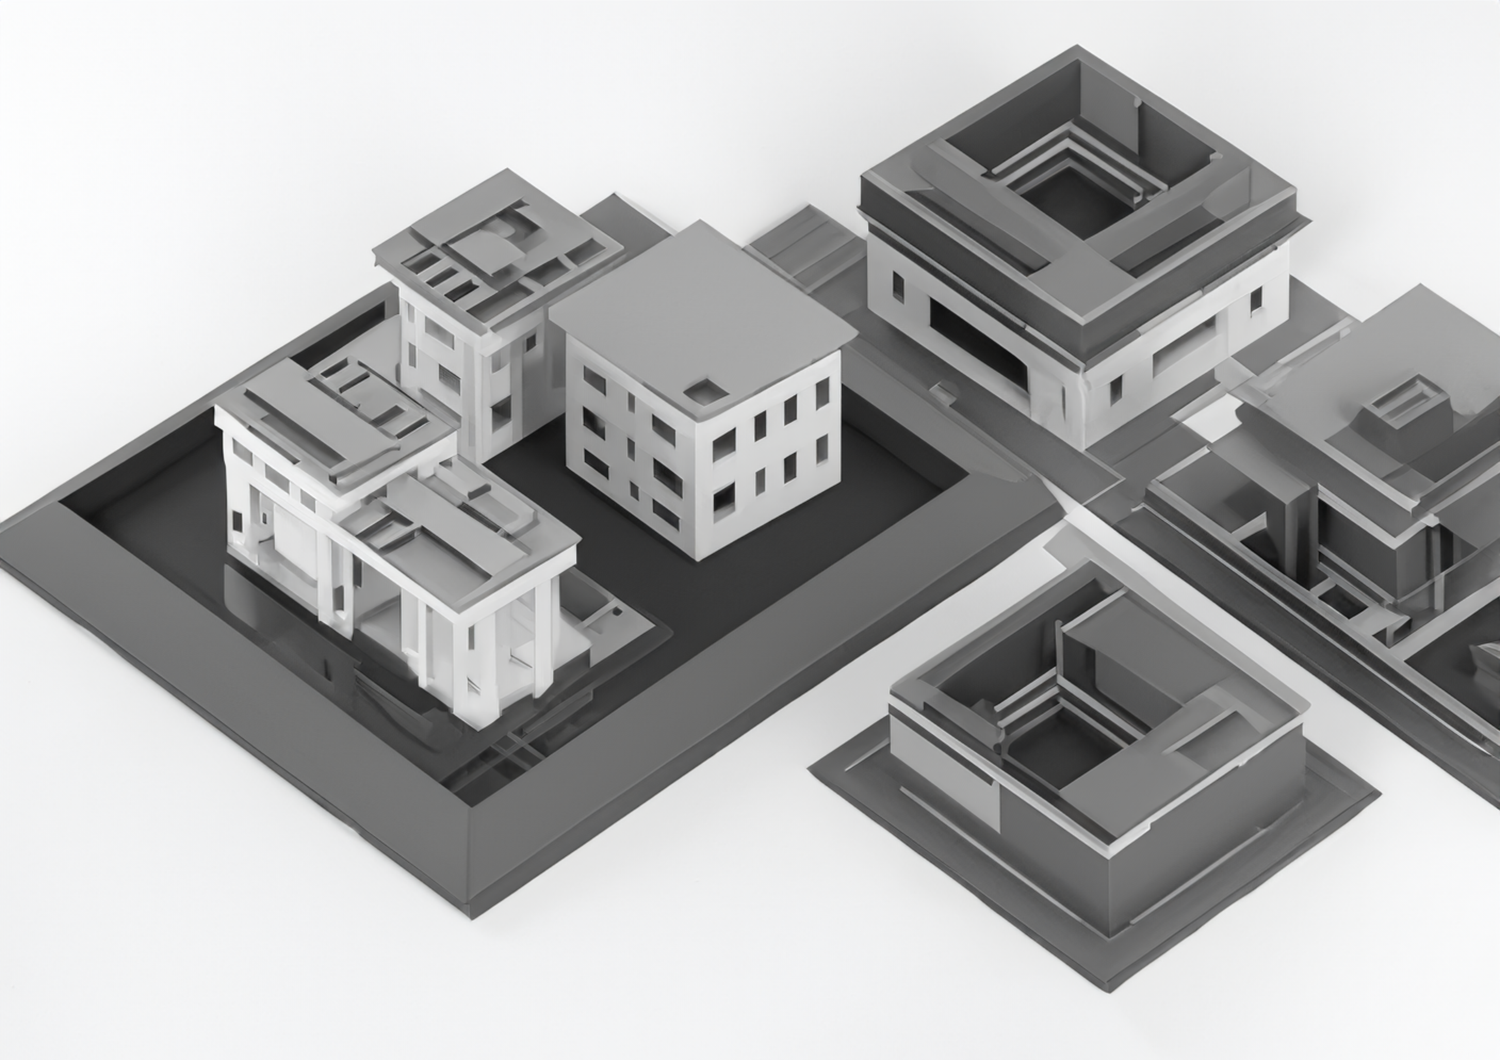 Transforming Interior Design with Accurate 3D Printed Architectural Models